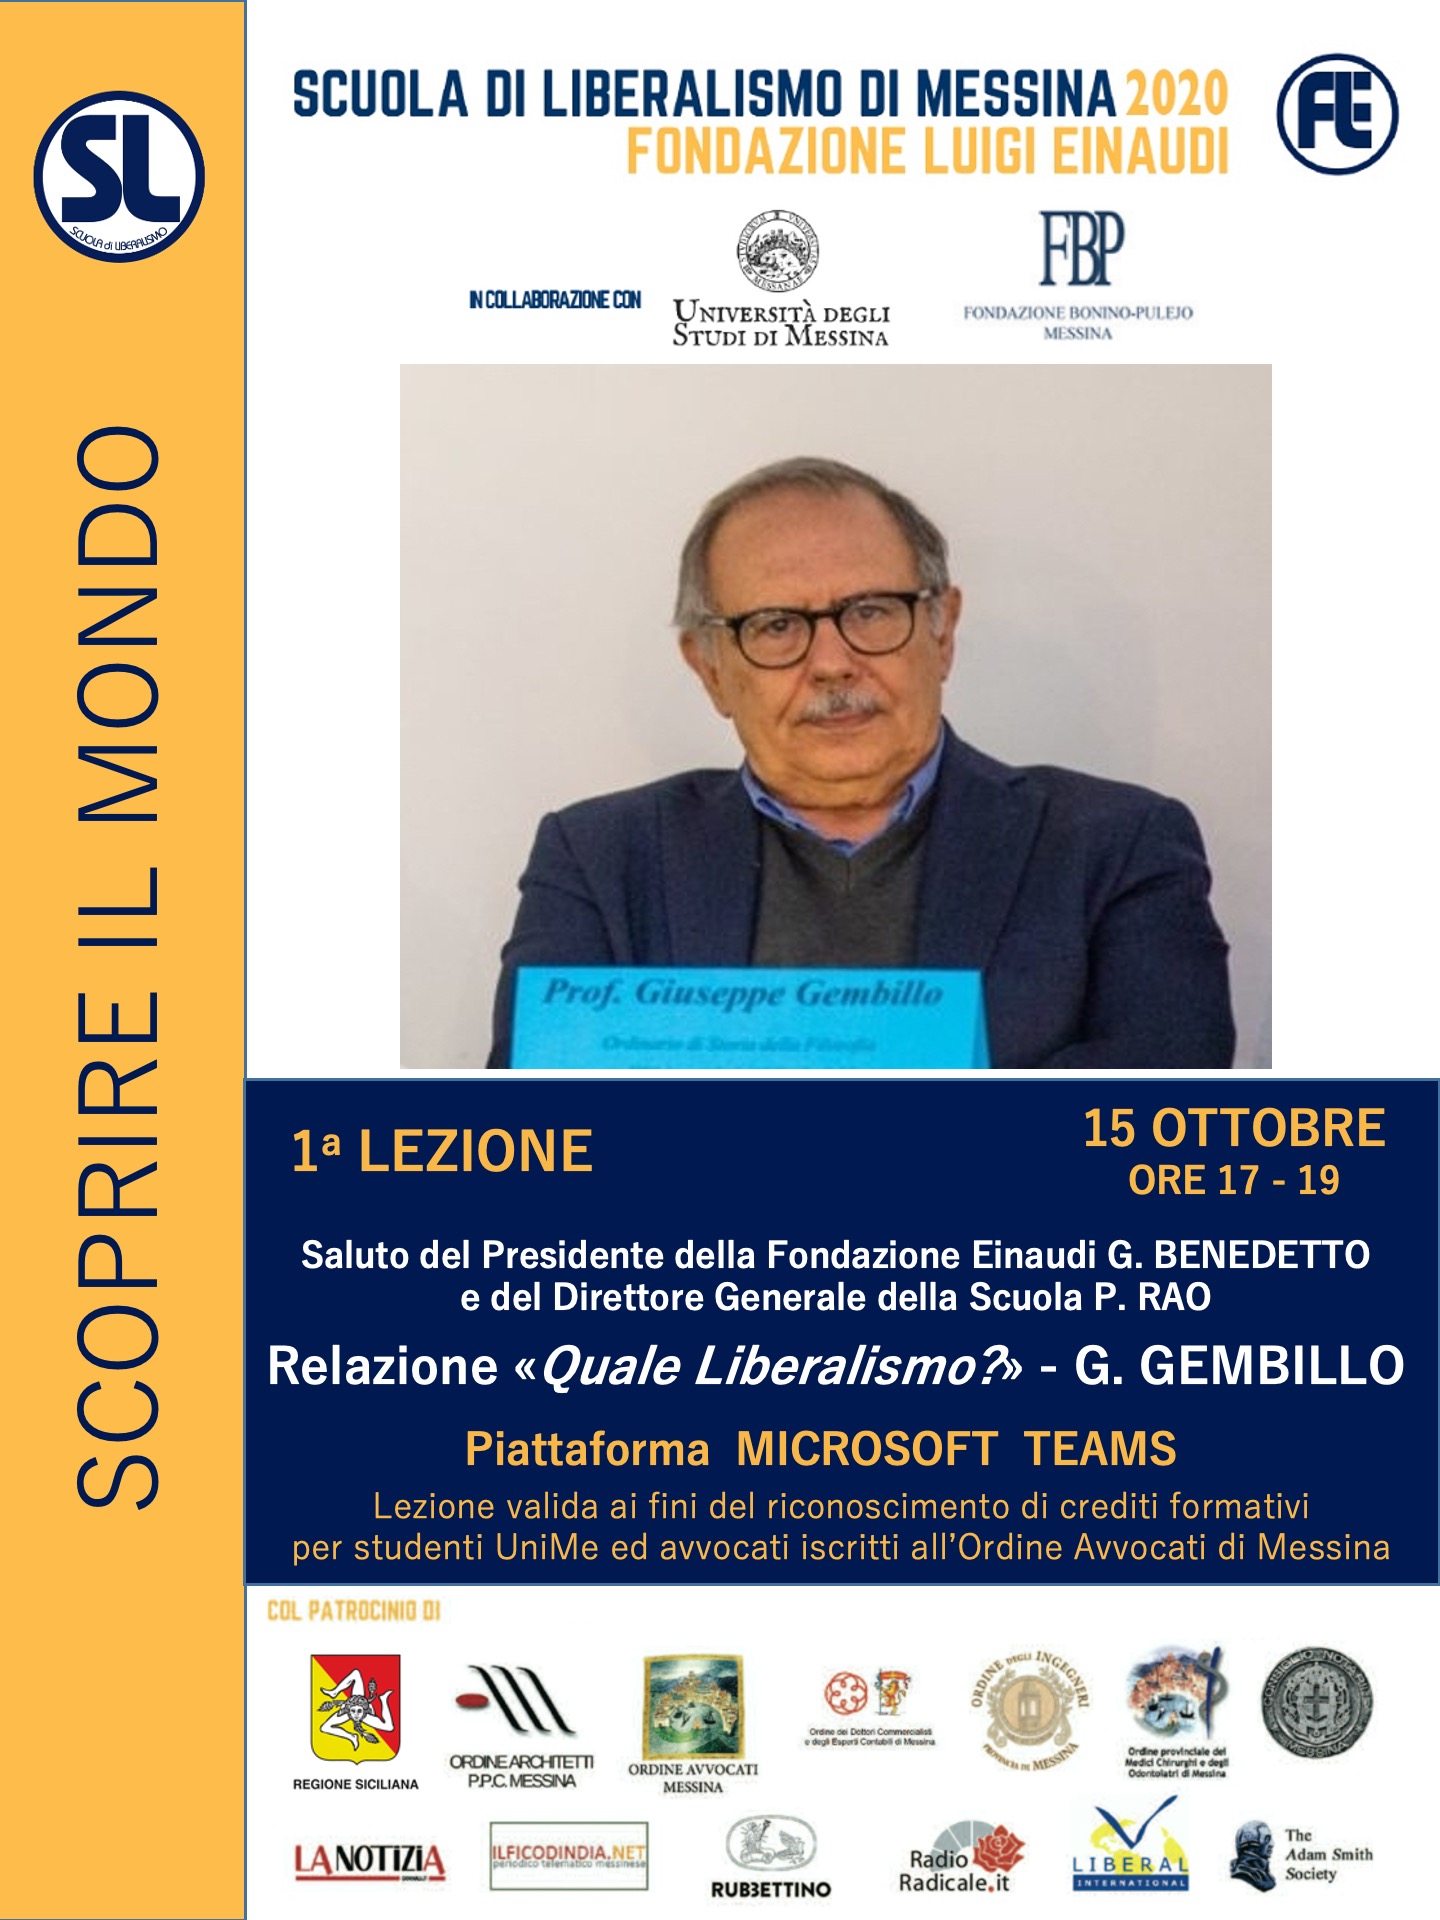 The Messina School of Liberalism will start on Thursday, October 15, 2020. President Giuseppe Benedetto will deliver the introductive speech on the behalf of the Luigi Einaudi Foundation